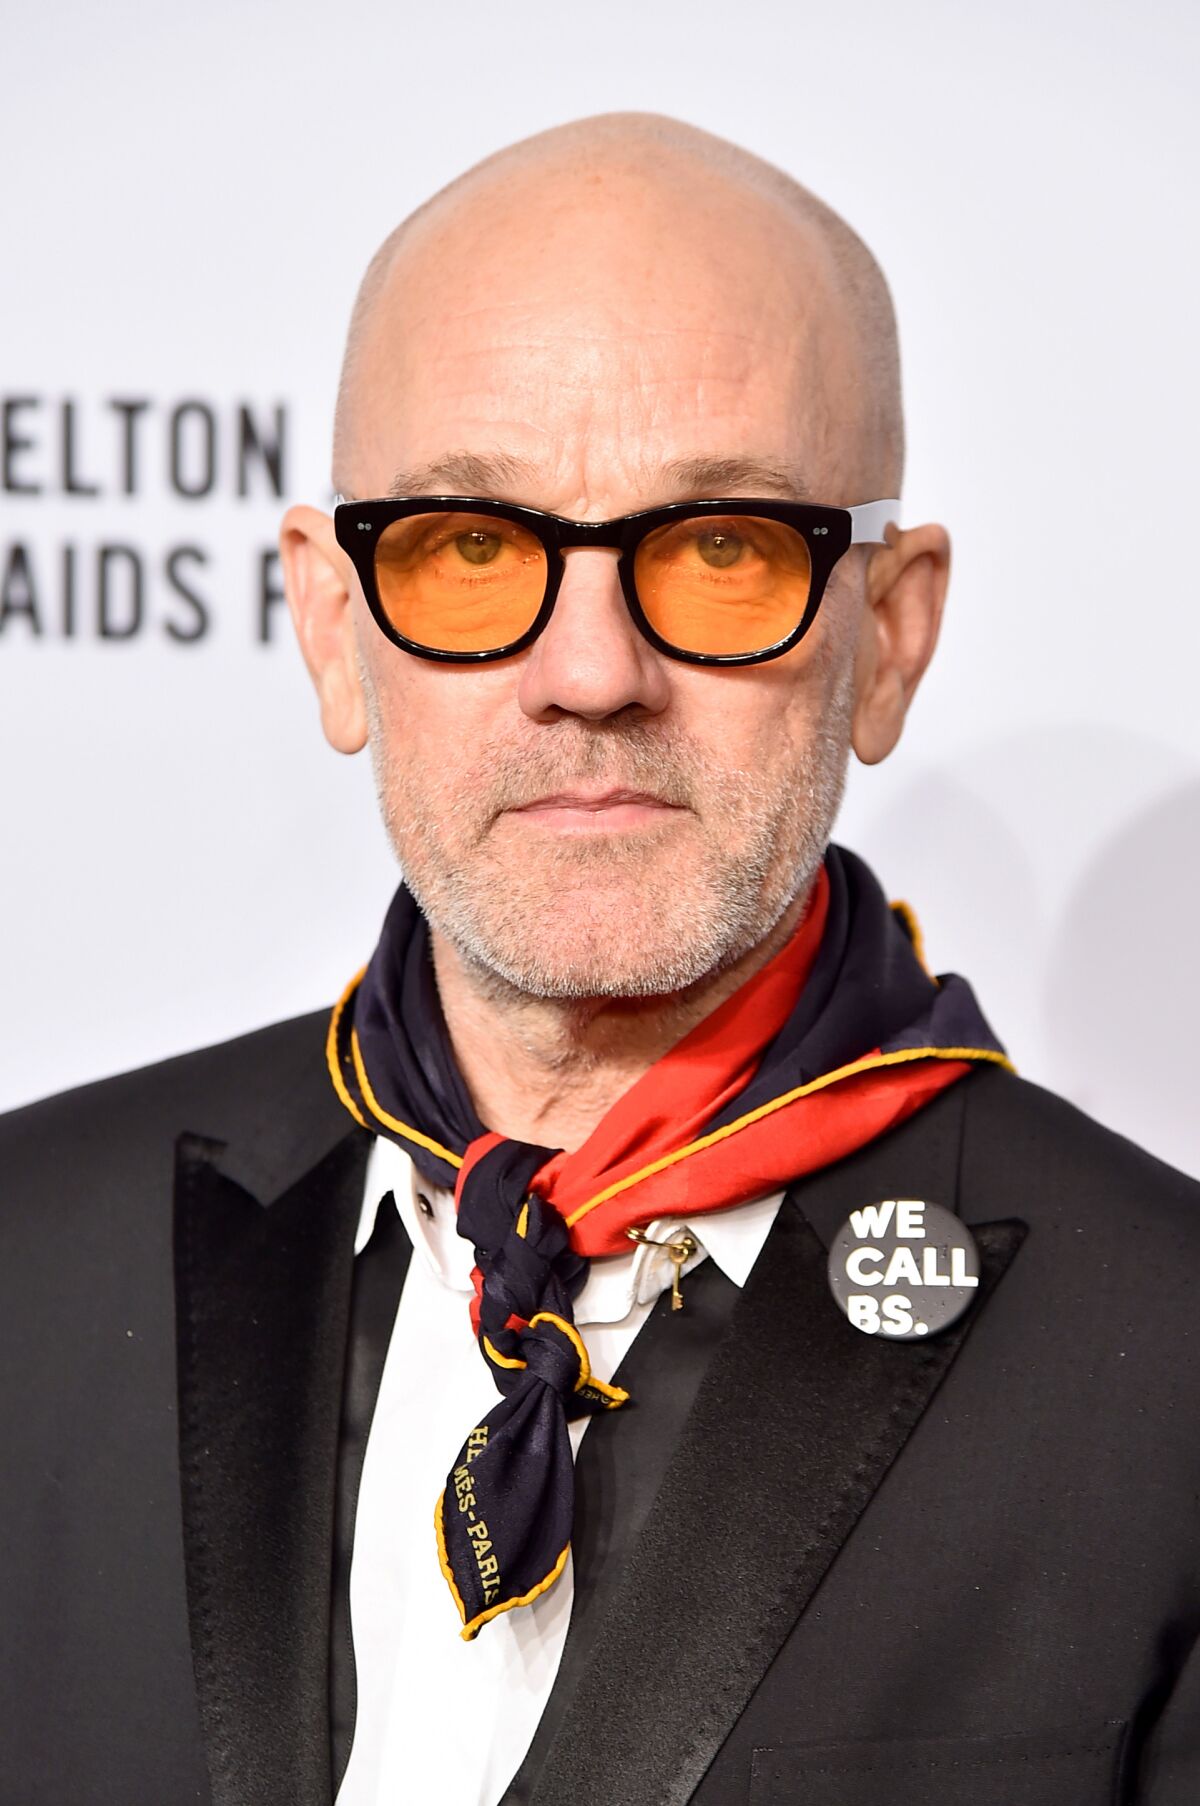 A man wearing tinted eyeglasses and a kerchief.